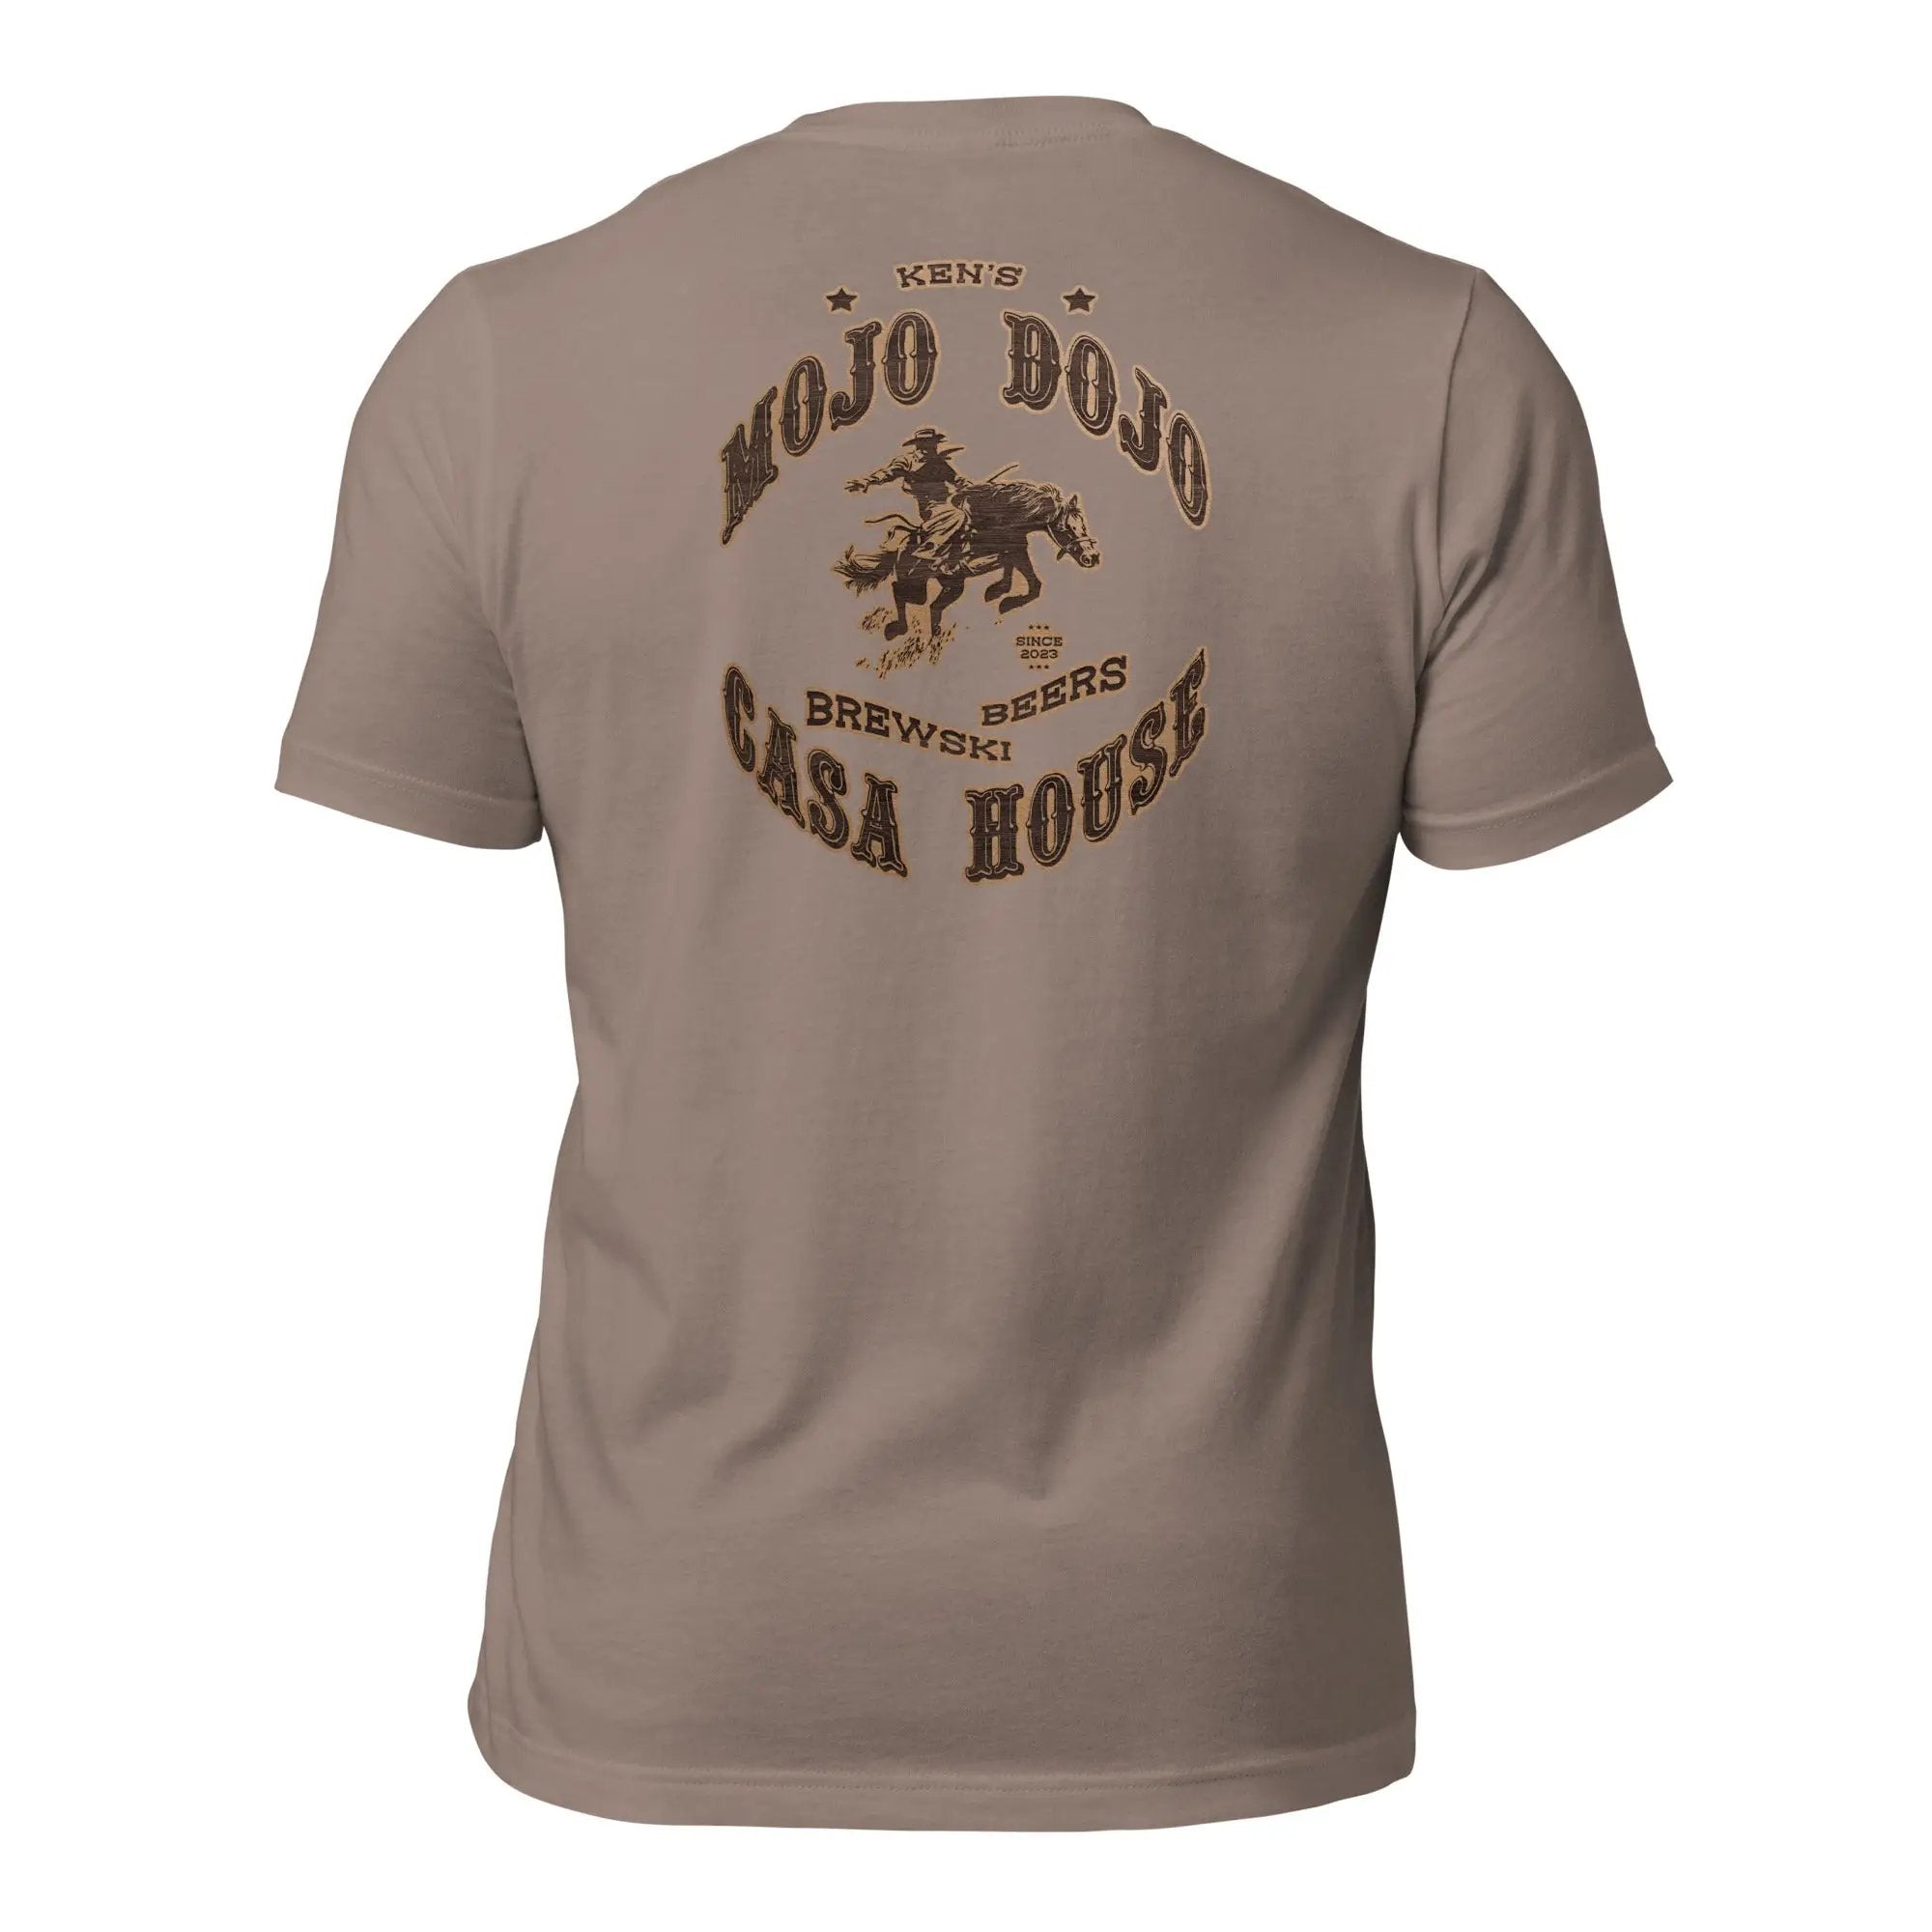 a t - shirt with the words moto boso on it